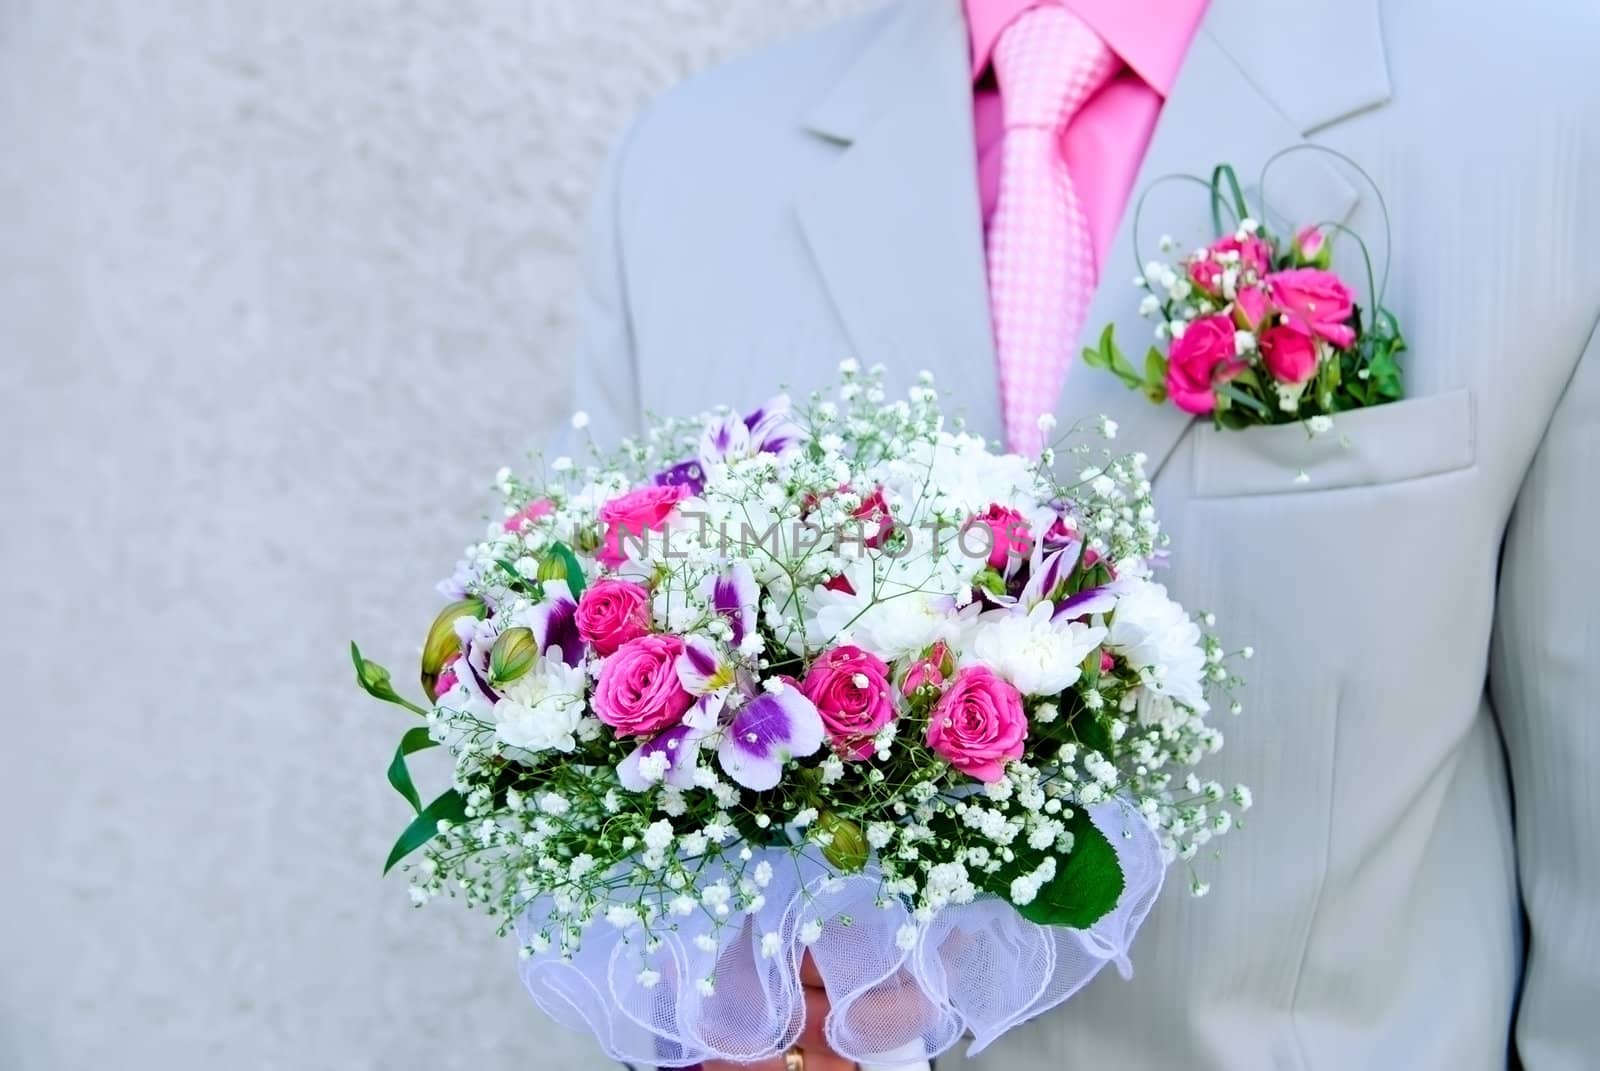 Bridal bouquet in the hand of the groom